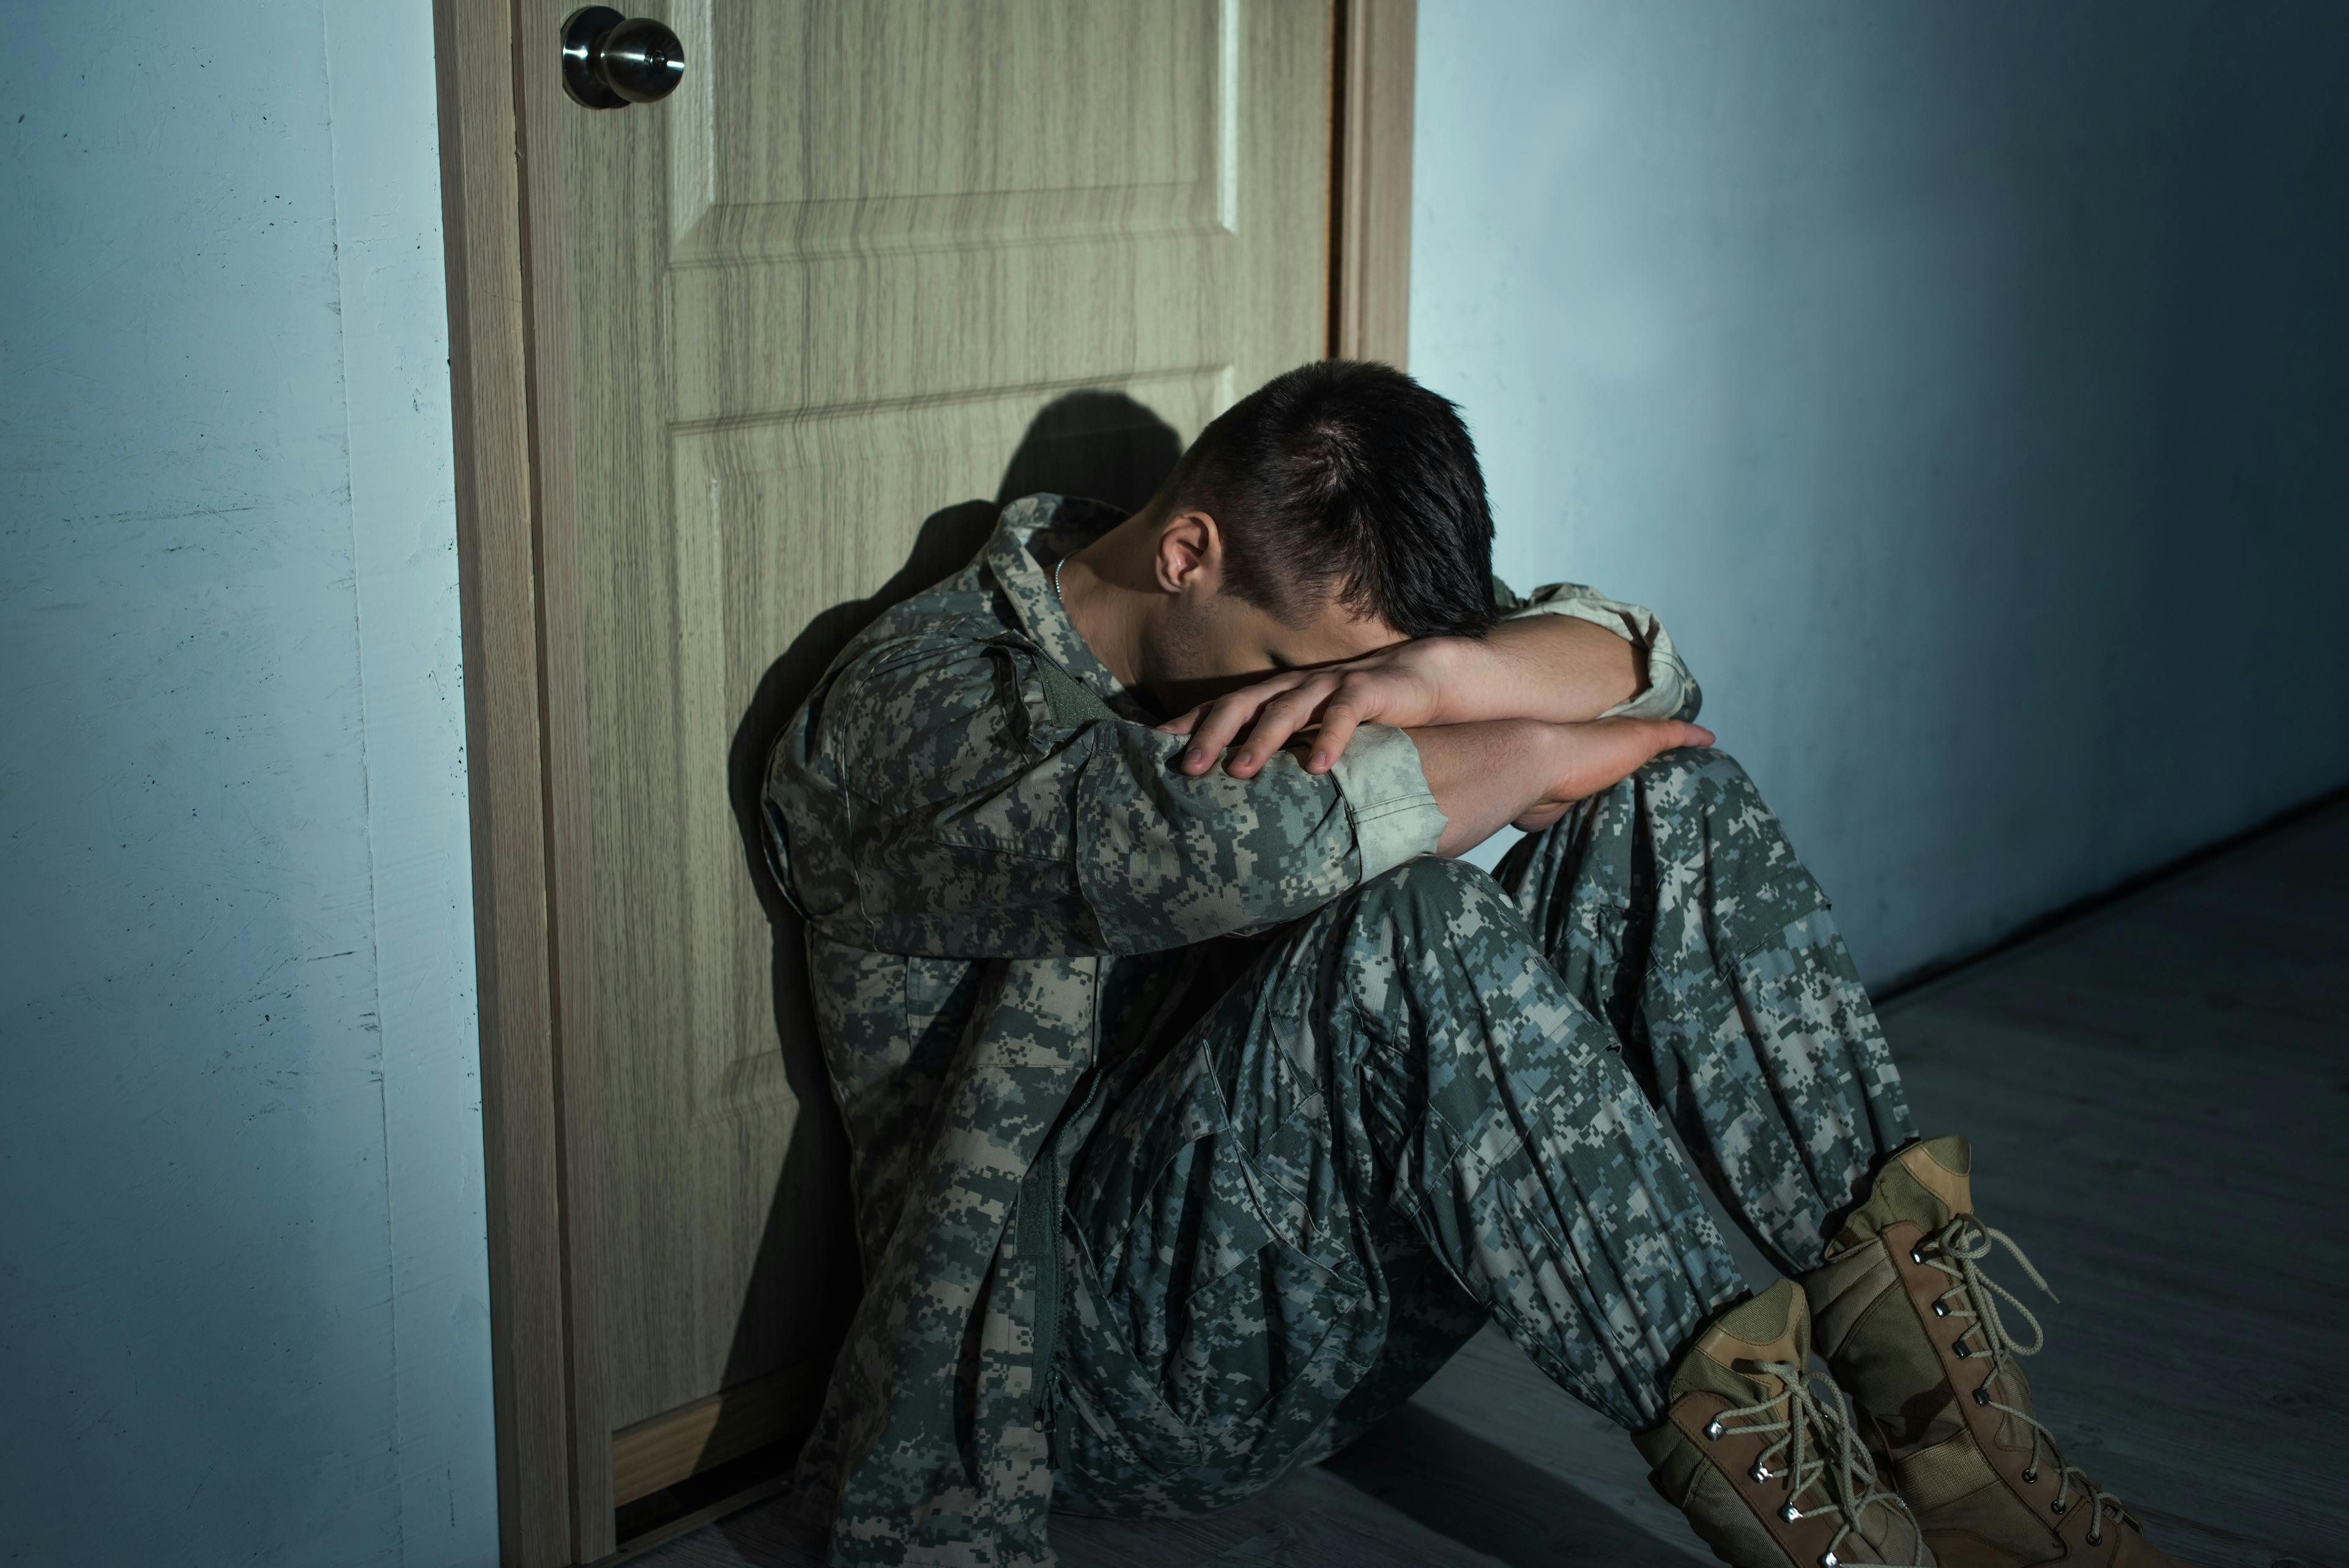 Military man with emotional distress sitting near door in hallway at home at night | Image Credit: LIGHTFIELD STUDIOS - stock.adobe.com